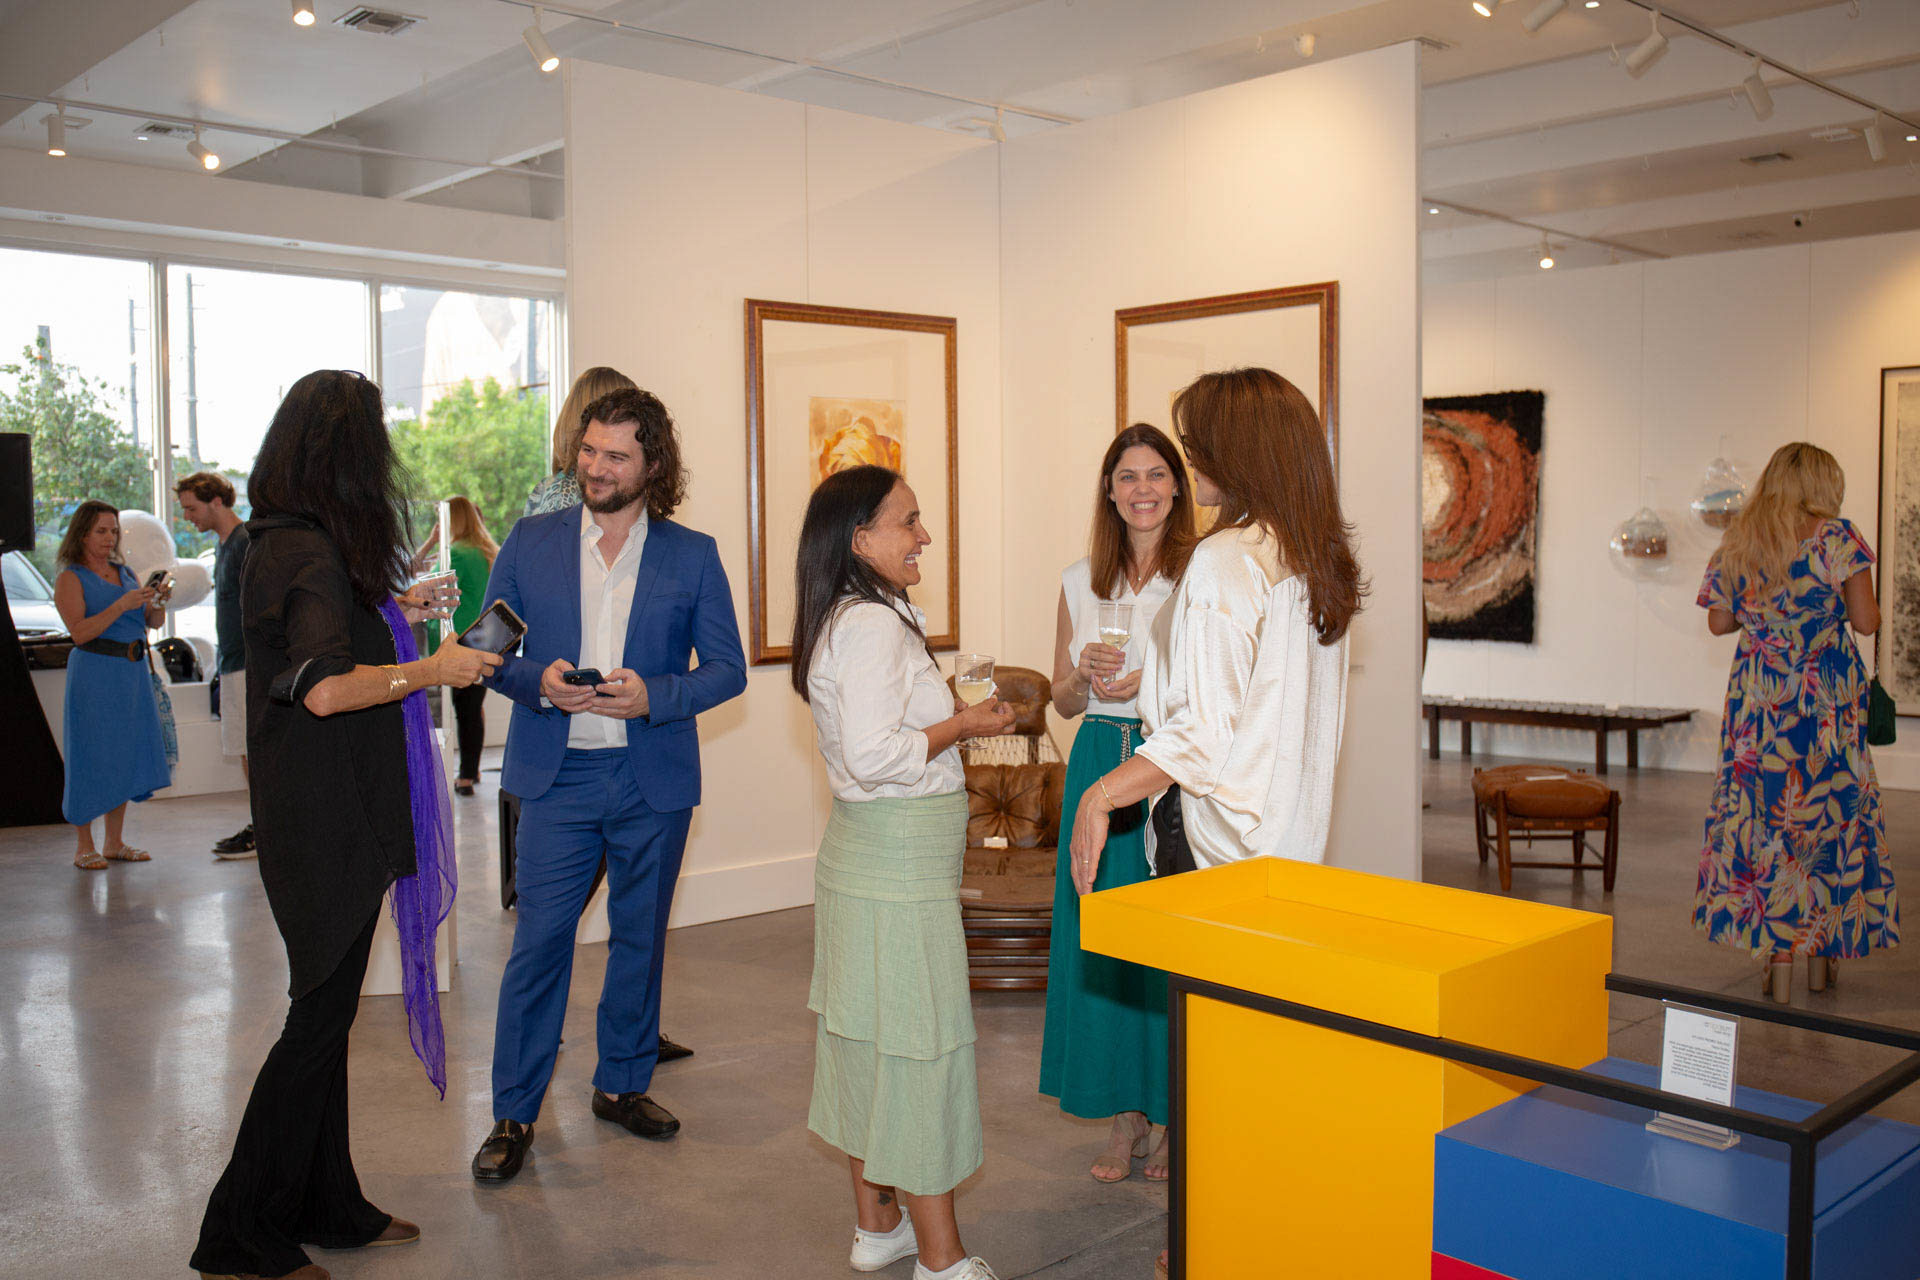 Artist Alex engaged in a lively discussion with art collectors at a gallery exhibition, with paintings and sculptures in the background.